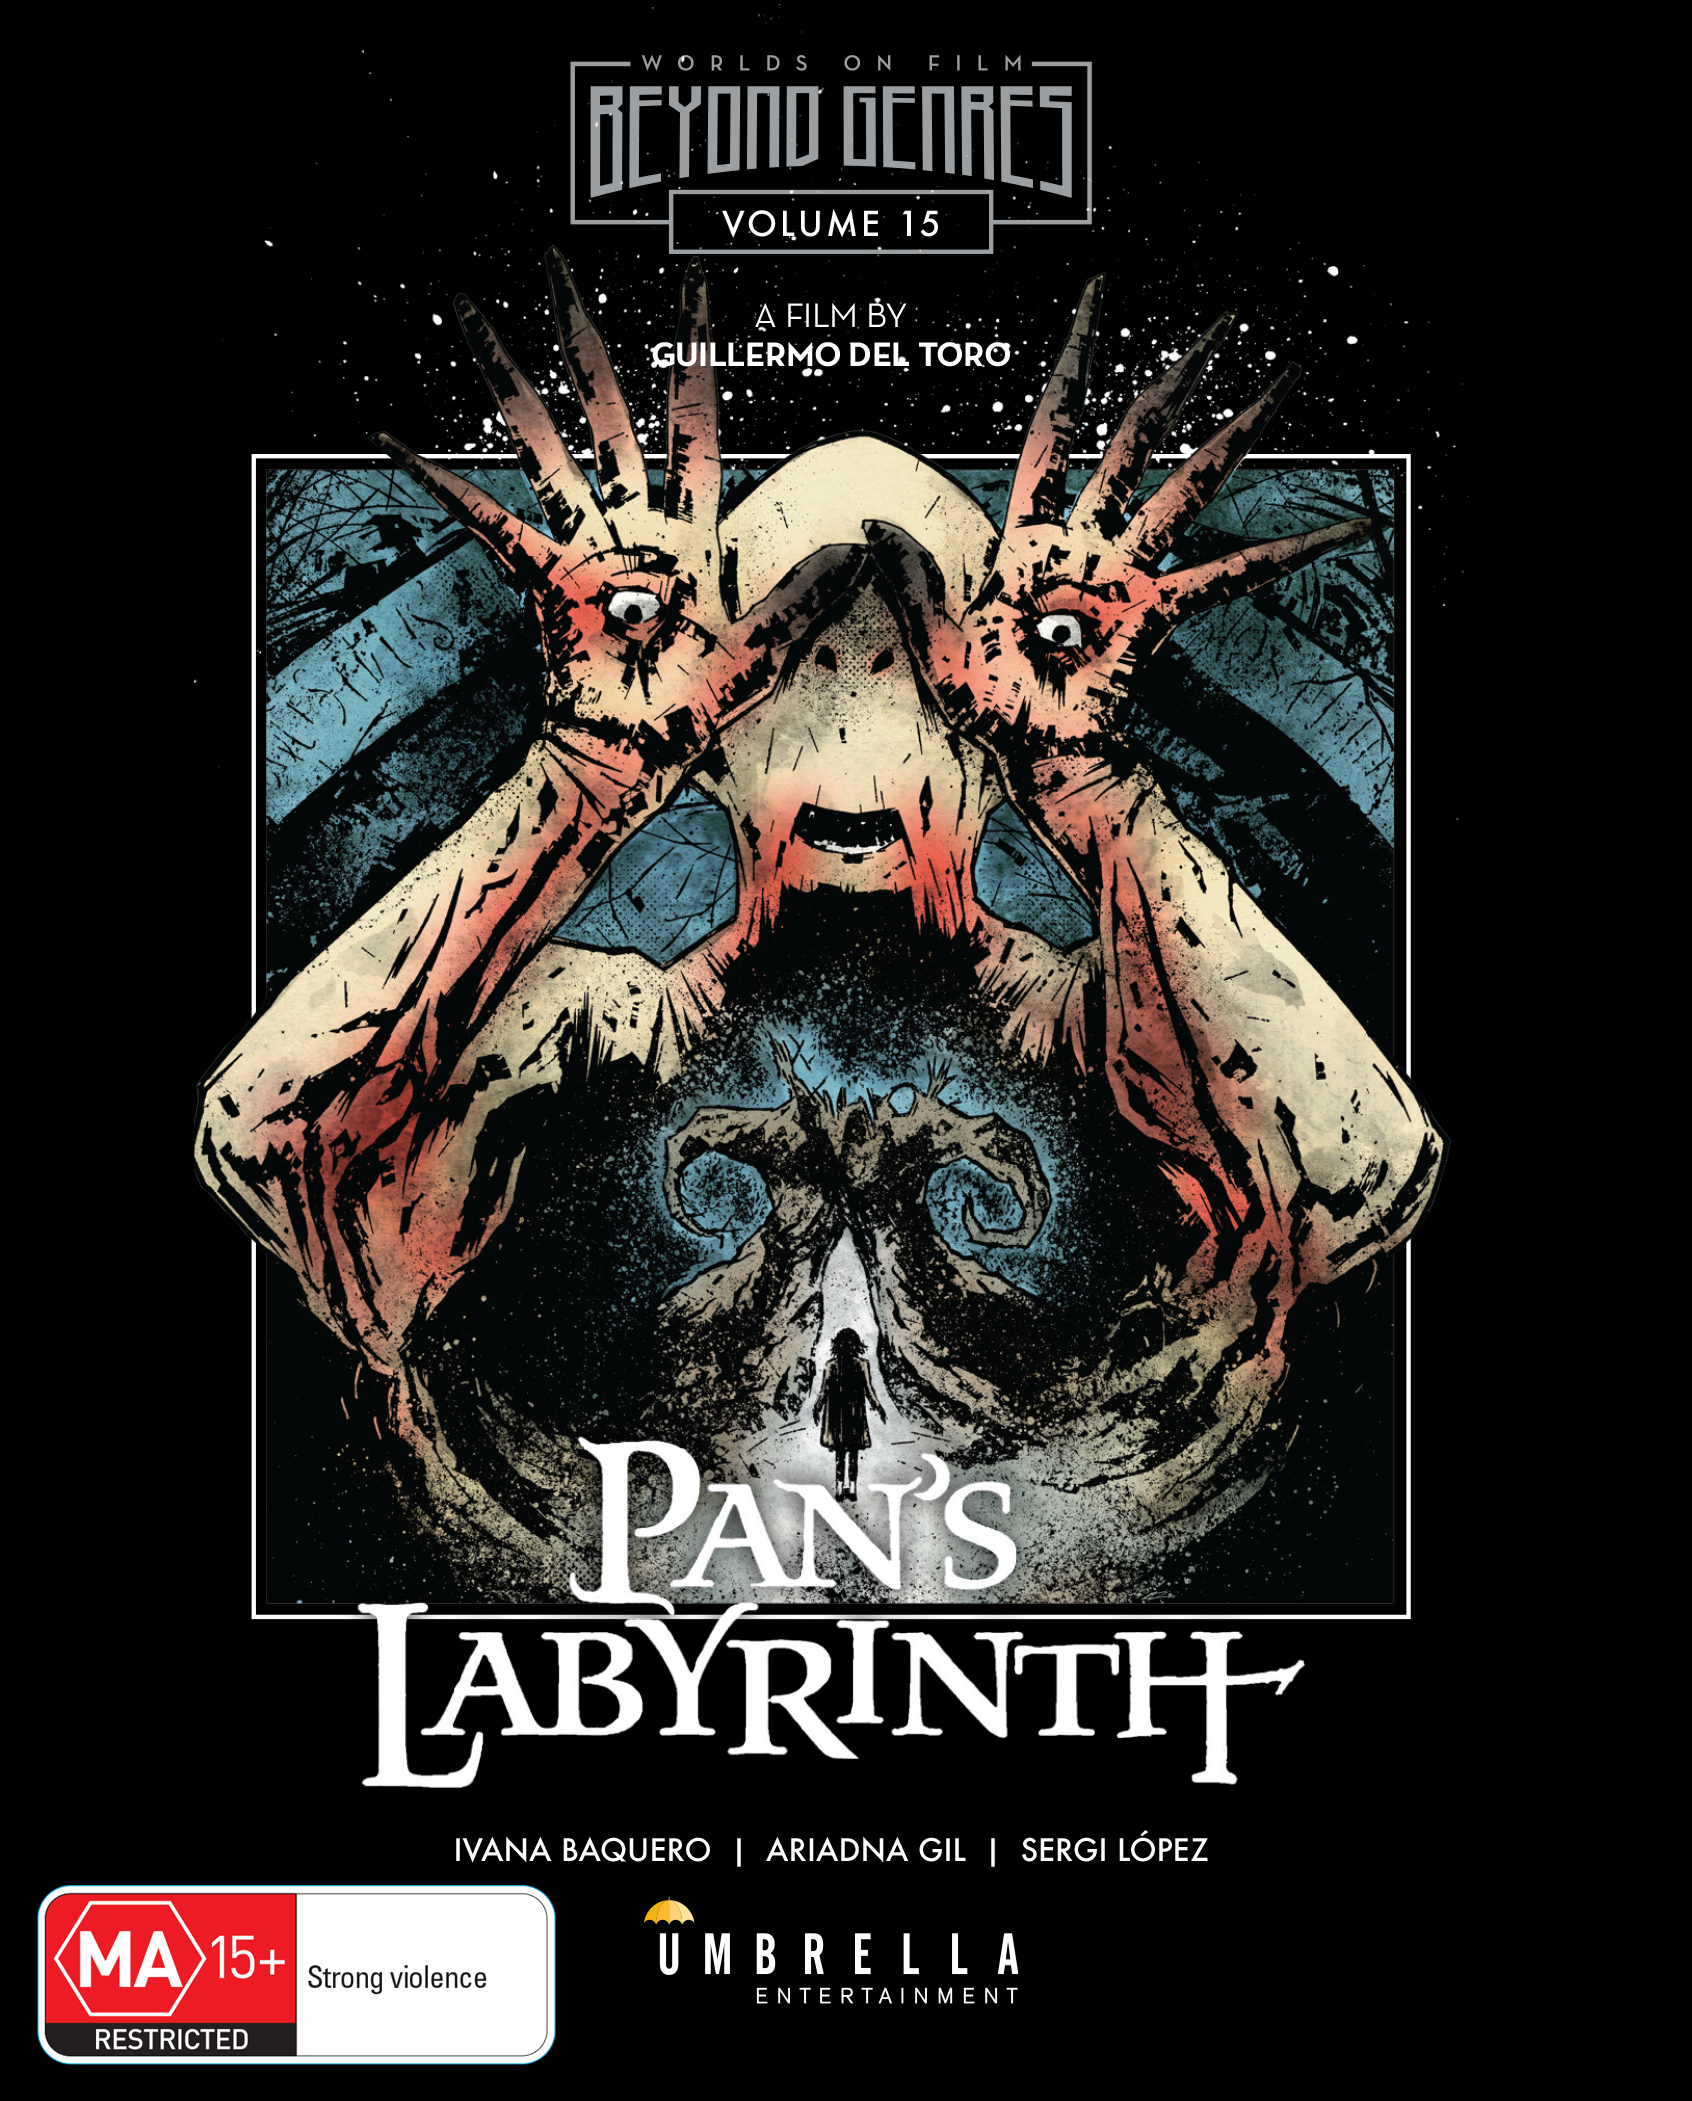 Pan's Labyrinth - Rotten Tomatoes